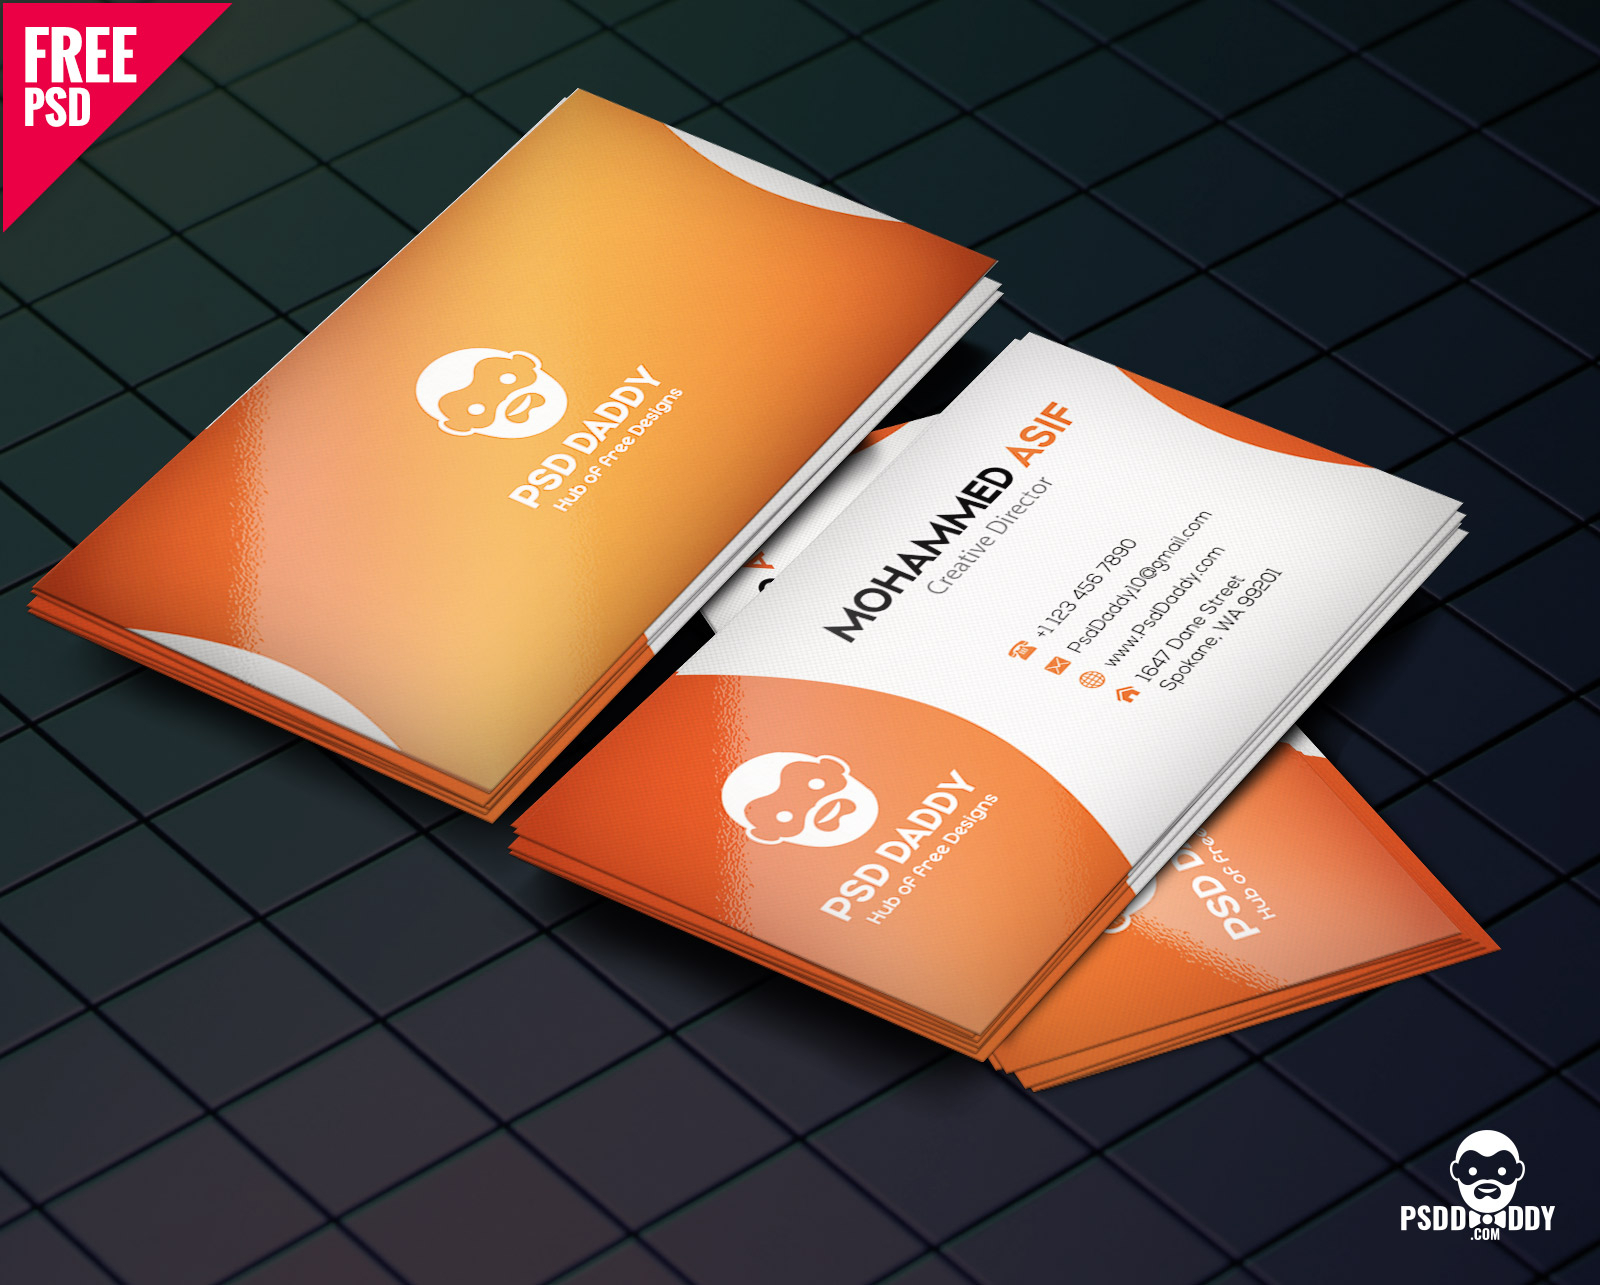 Download] Business Card Design Psd Free | Psddaddy With Regard To Visiting Card Psd Template Free Download